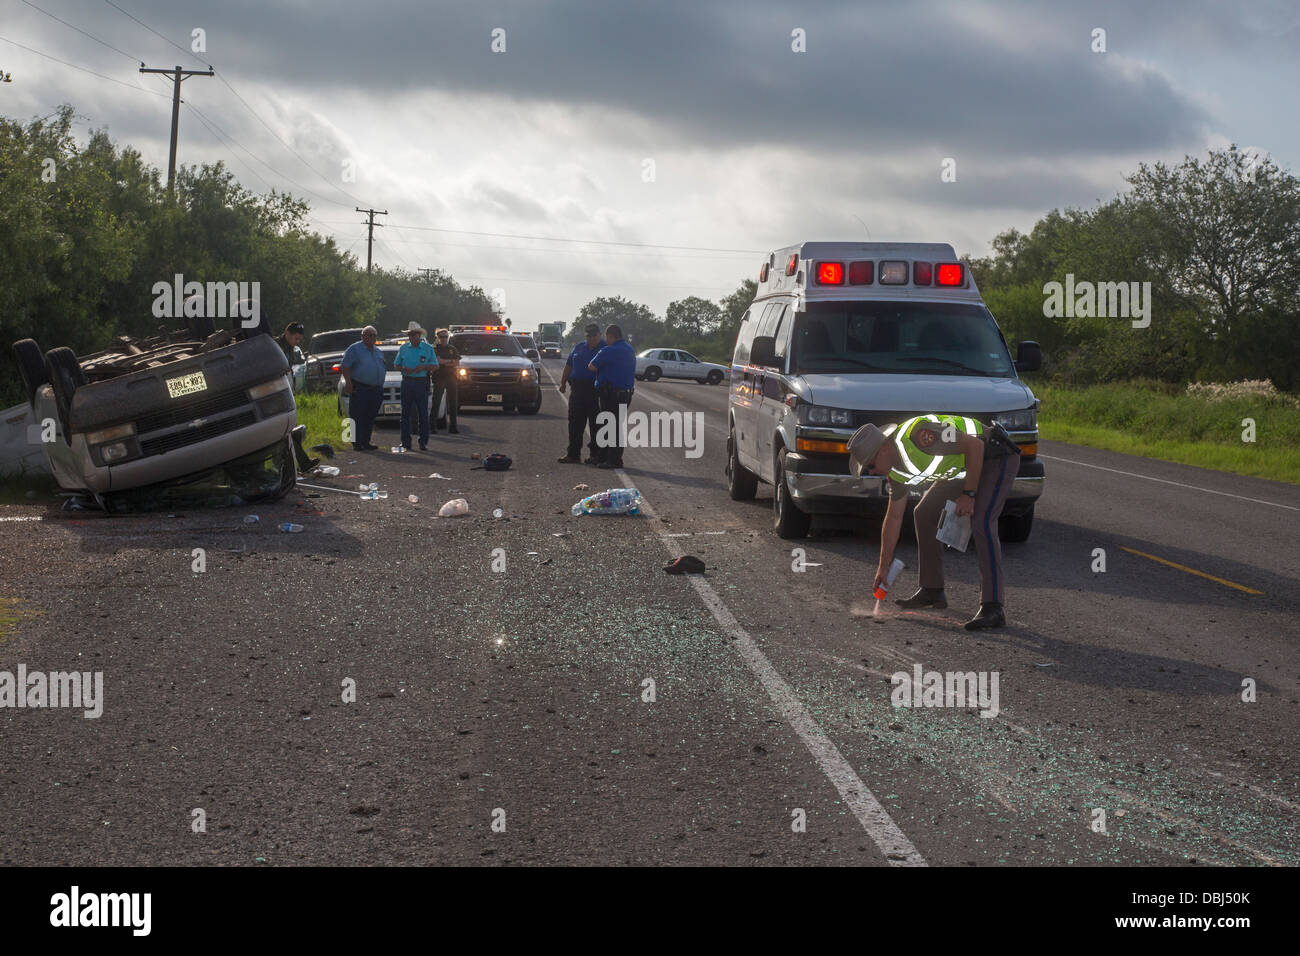 Falfurrias, Texas - An van holding 26 undocumented immigrants from Central America overturned on Texas Highway 285. Stock Photo